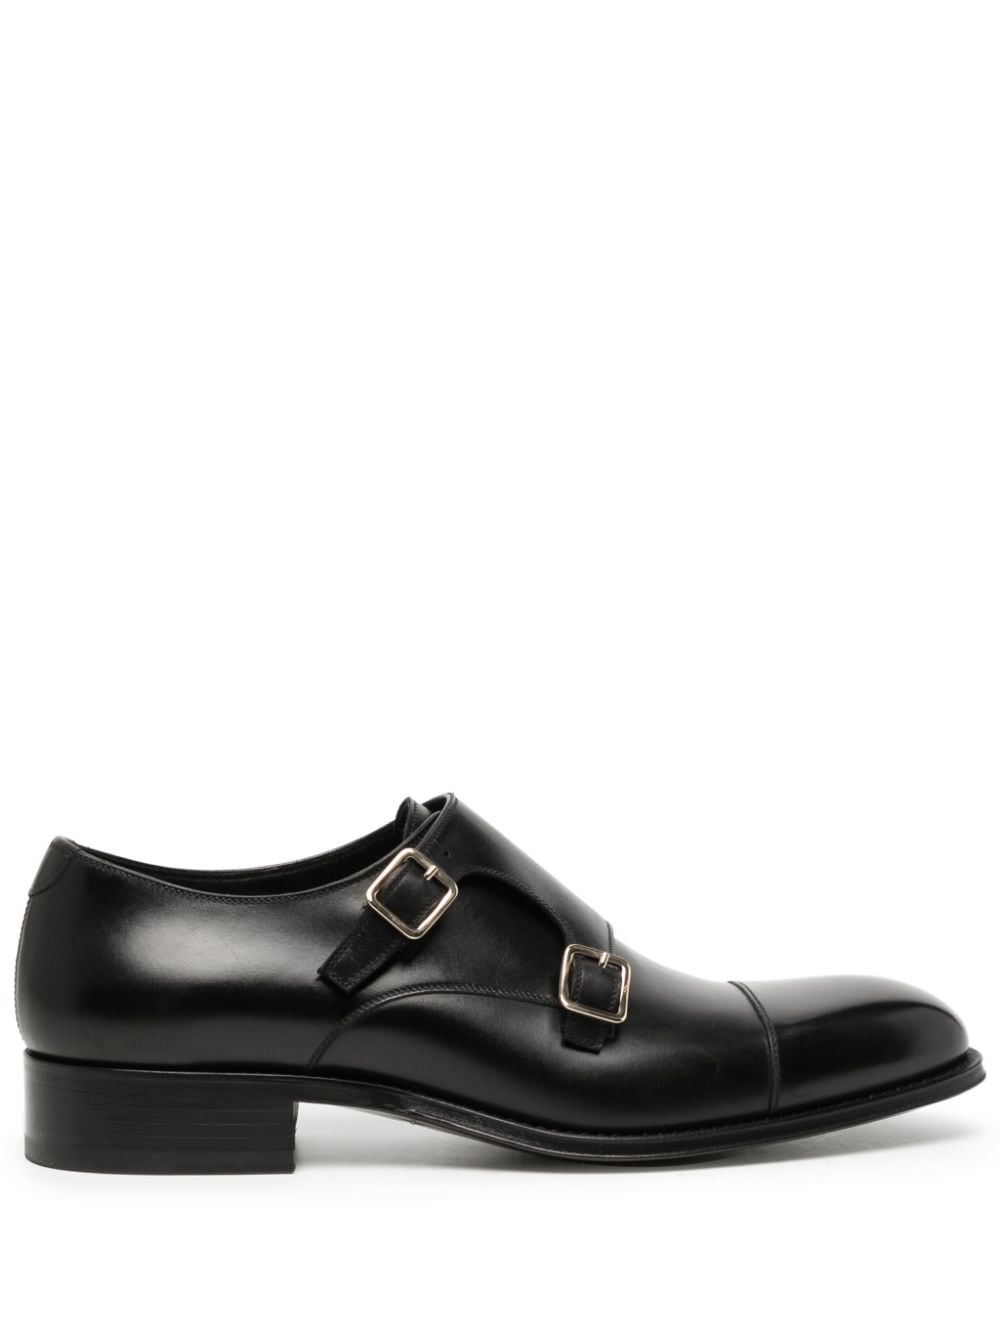 TOM FORD Claydmon leather monk shoes Black